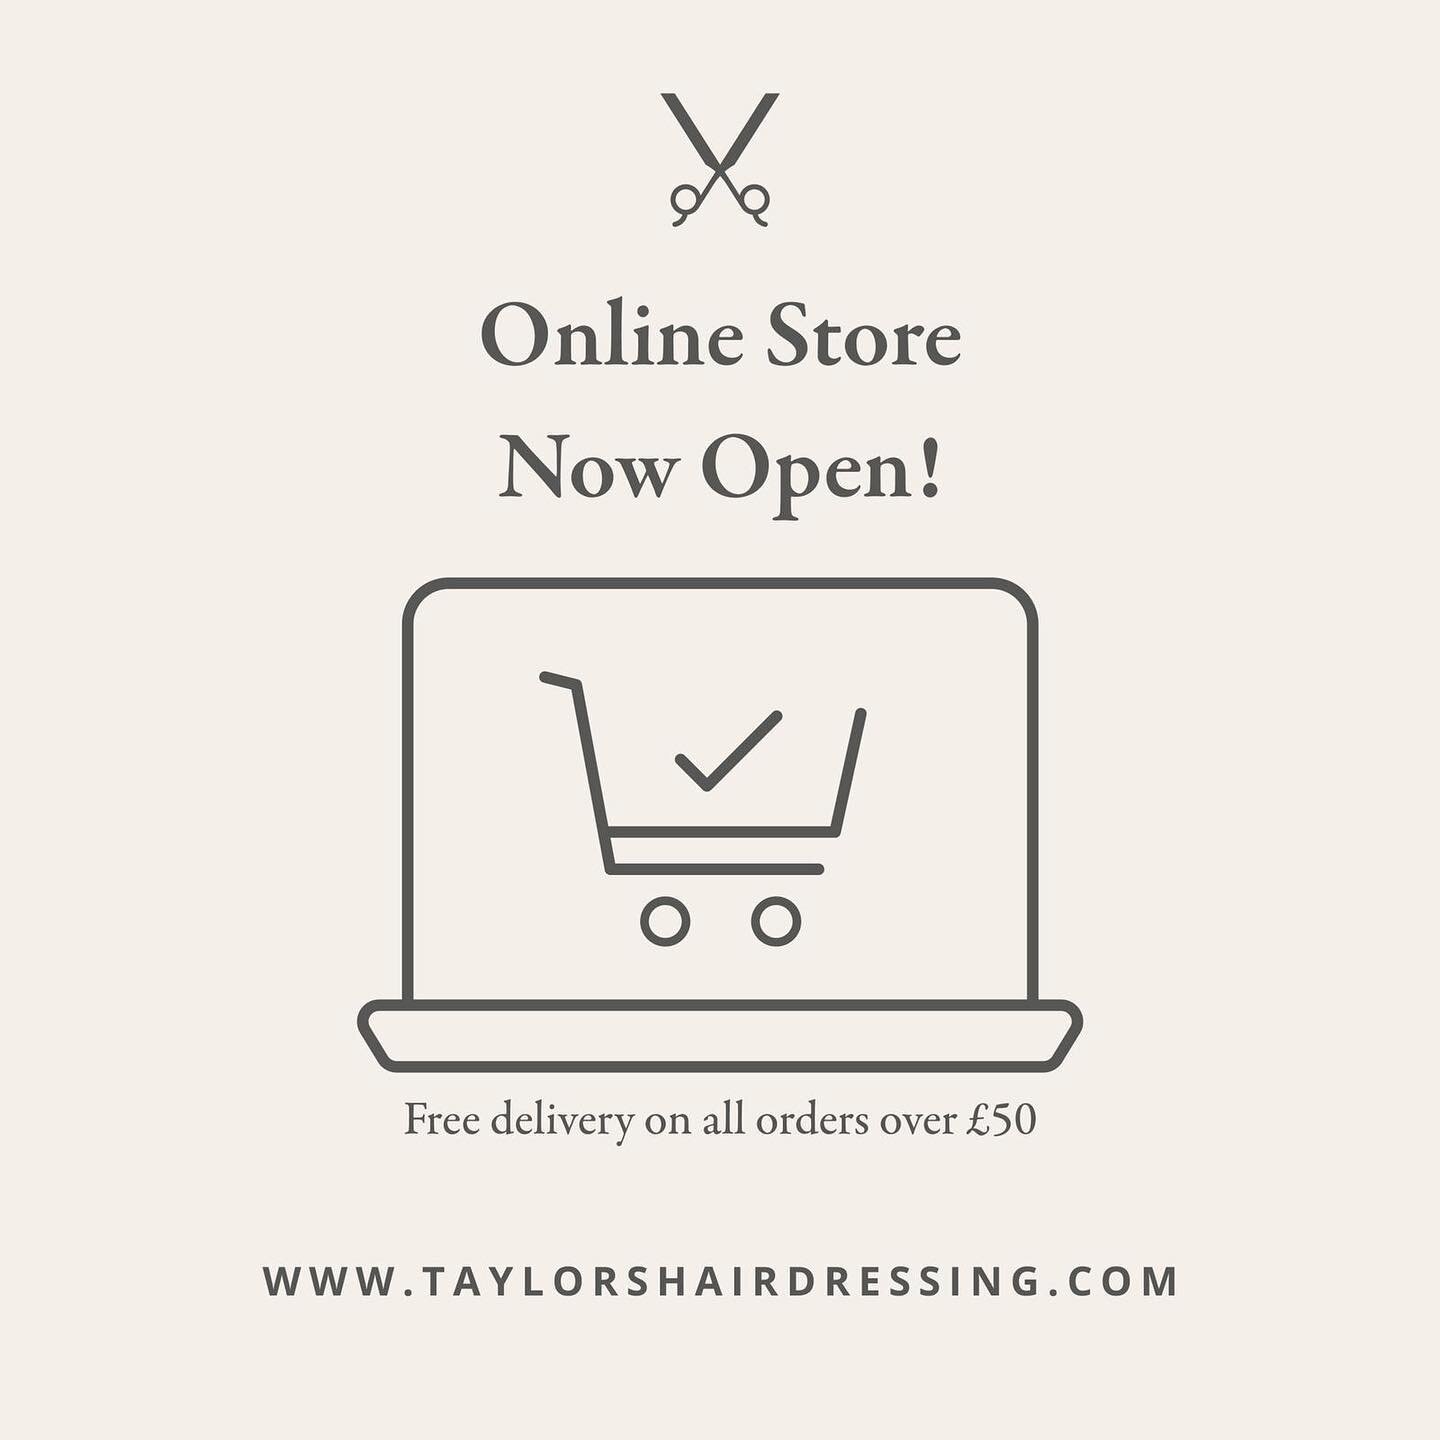 New online shop for all your haircare needs  #shoplocal #taylorshairdressingcanterbury #sustainablehaircare